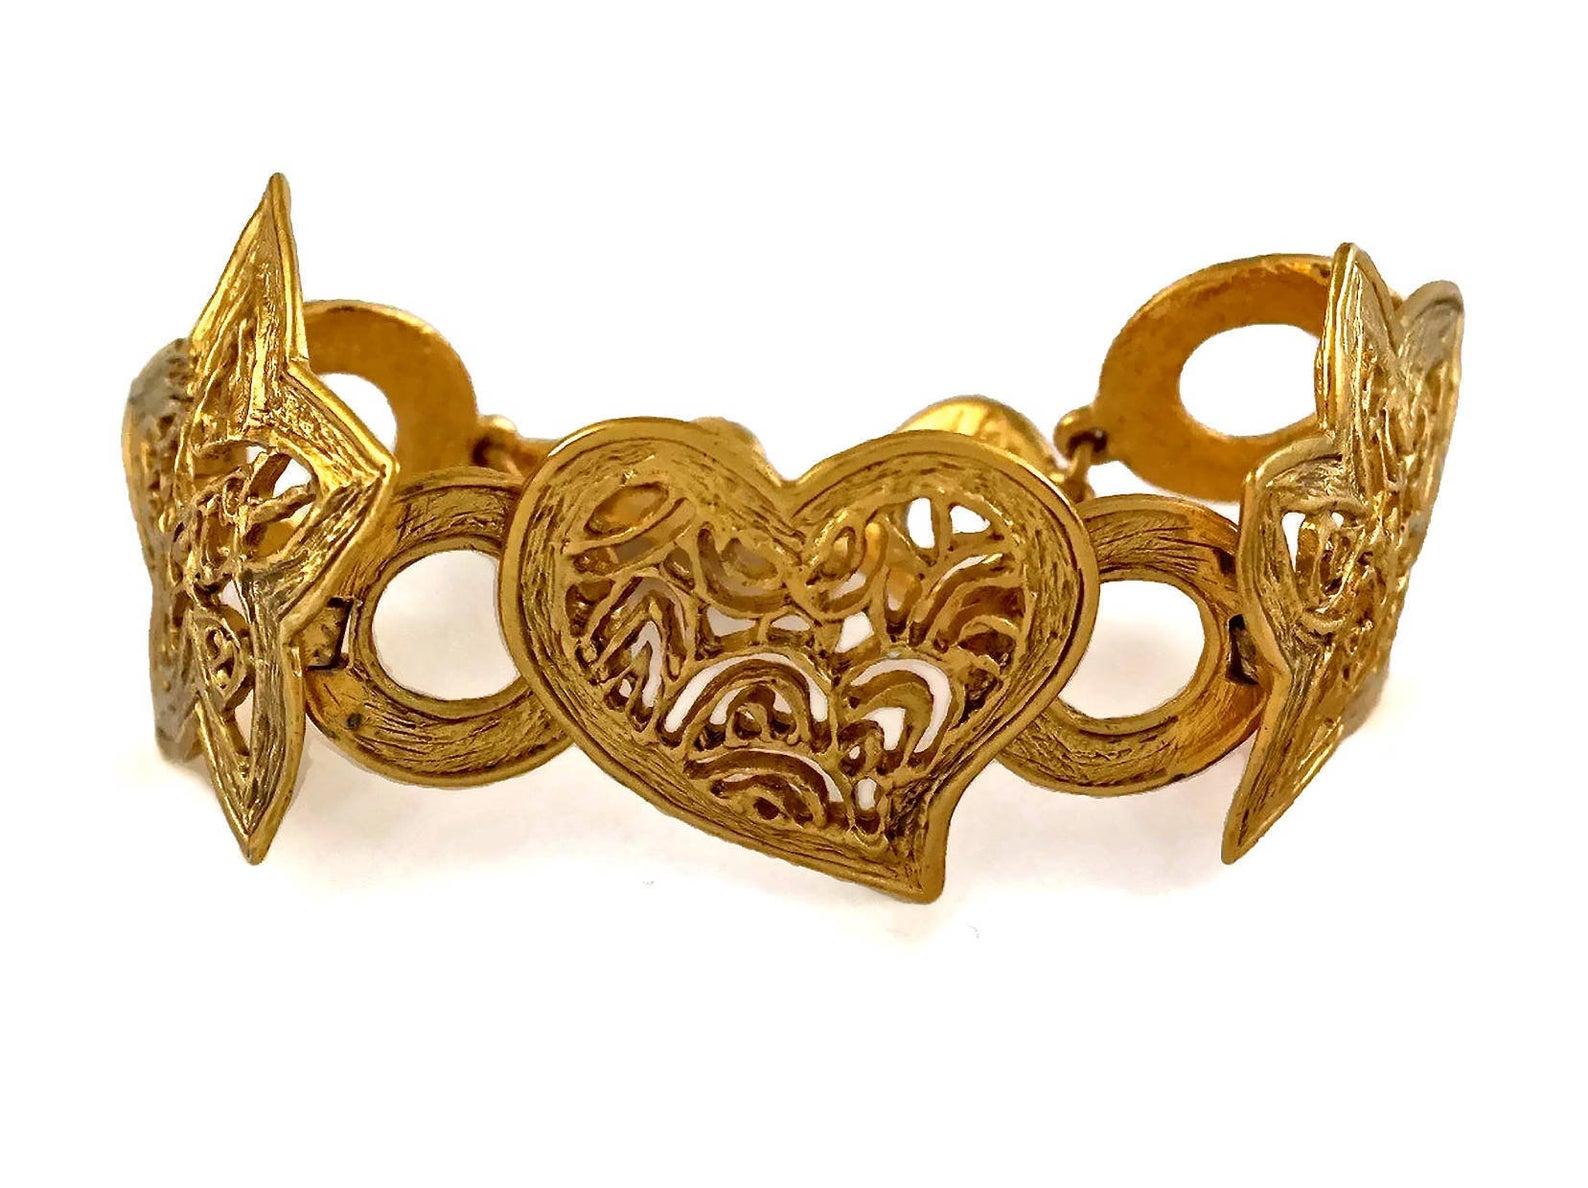 Vintage YVES SAINT LAURENT Ysl Openwork Heart Star Bracelet

Measurements:
Height: 1.65 inches (4.2 cm)
Length: 7.28 inches to 8.46 inches (18.5 cm to 21.5 cm)

Features:
- 100% authentic YVES SAINT LAURENT.
- Heart and stars link with openwork